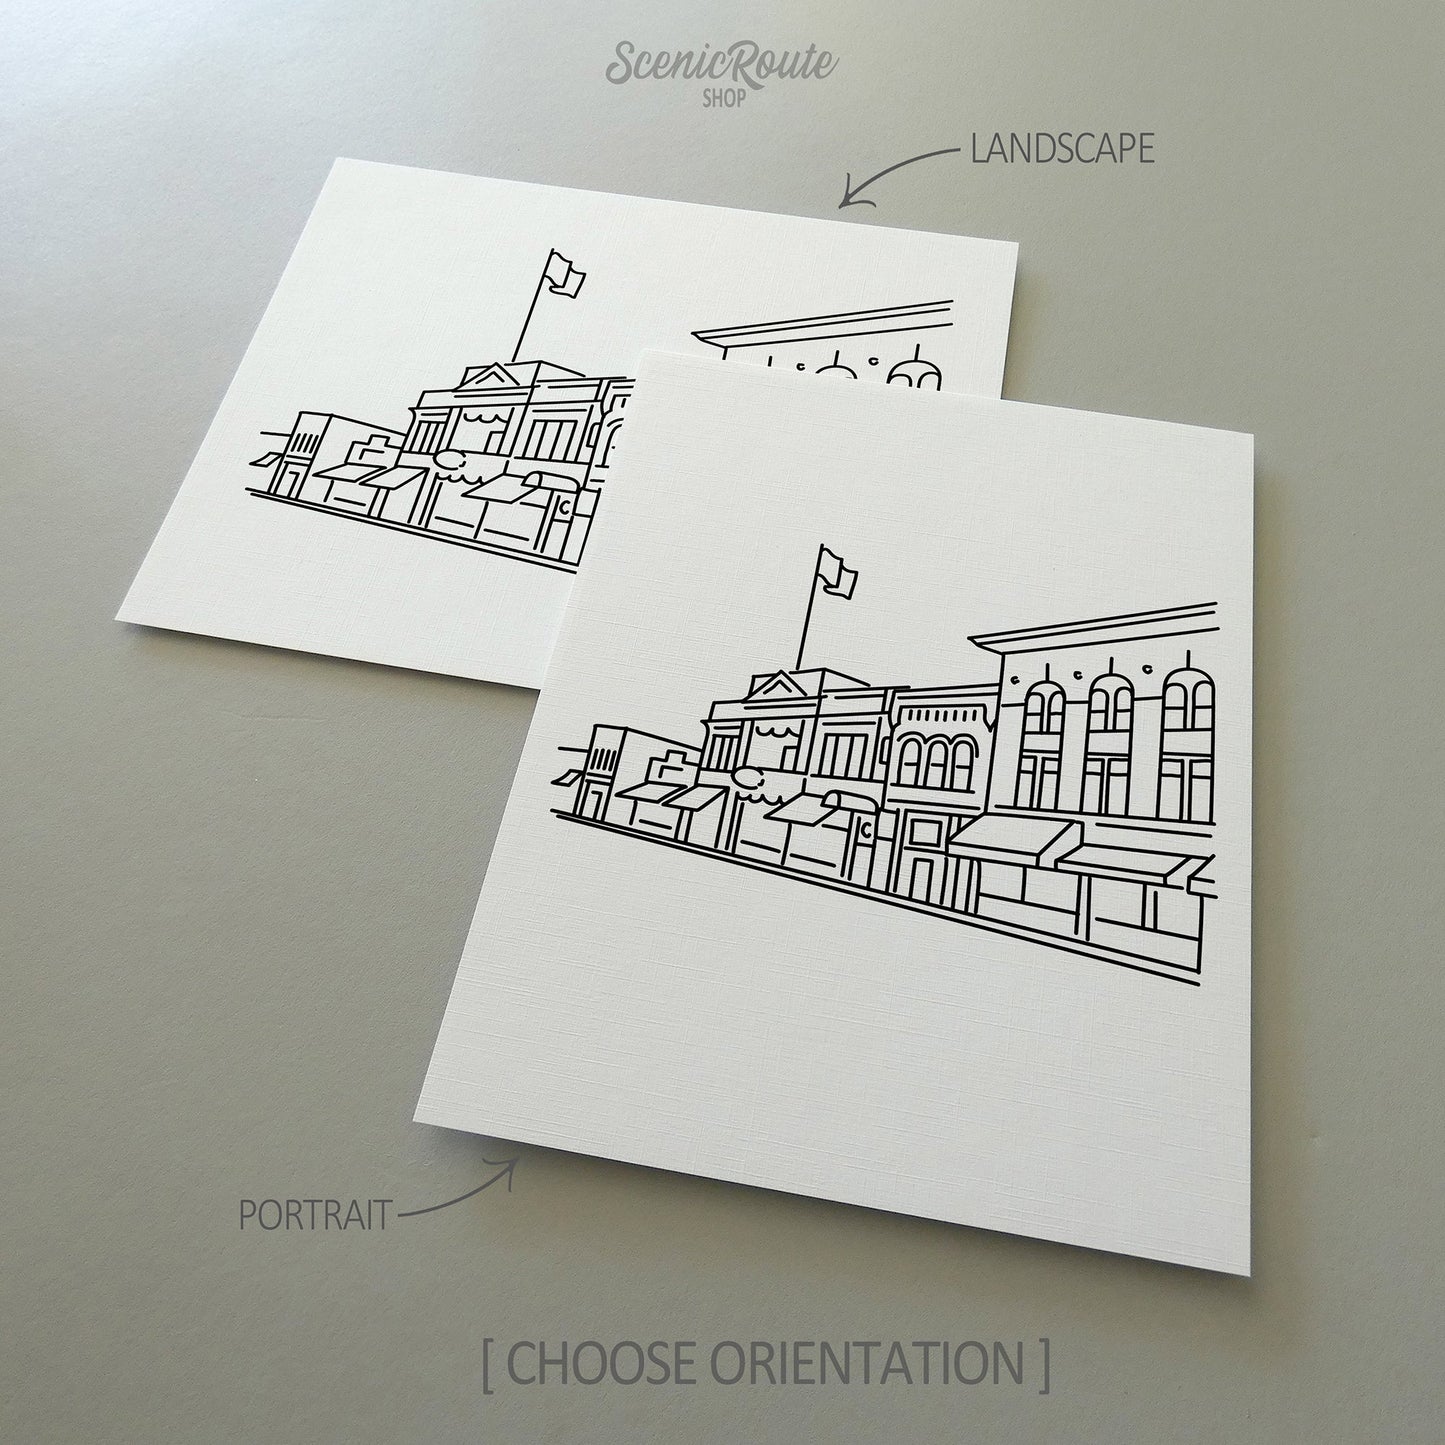 Two line art drawings of the Prescott Skyline on white linen paper with a gray background.  The pieces are shown in portrait and landscape orientation for the available art print options.